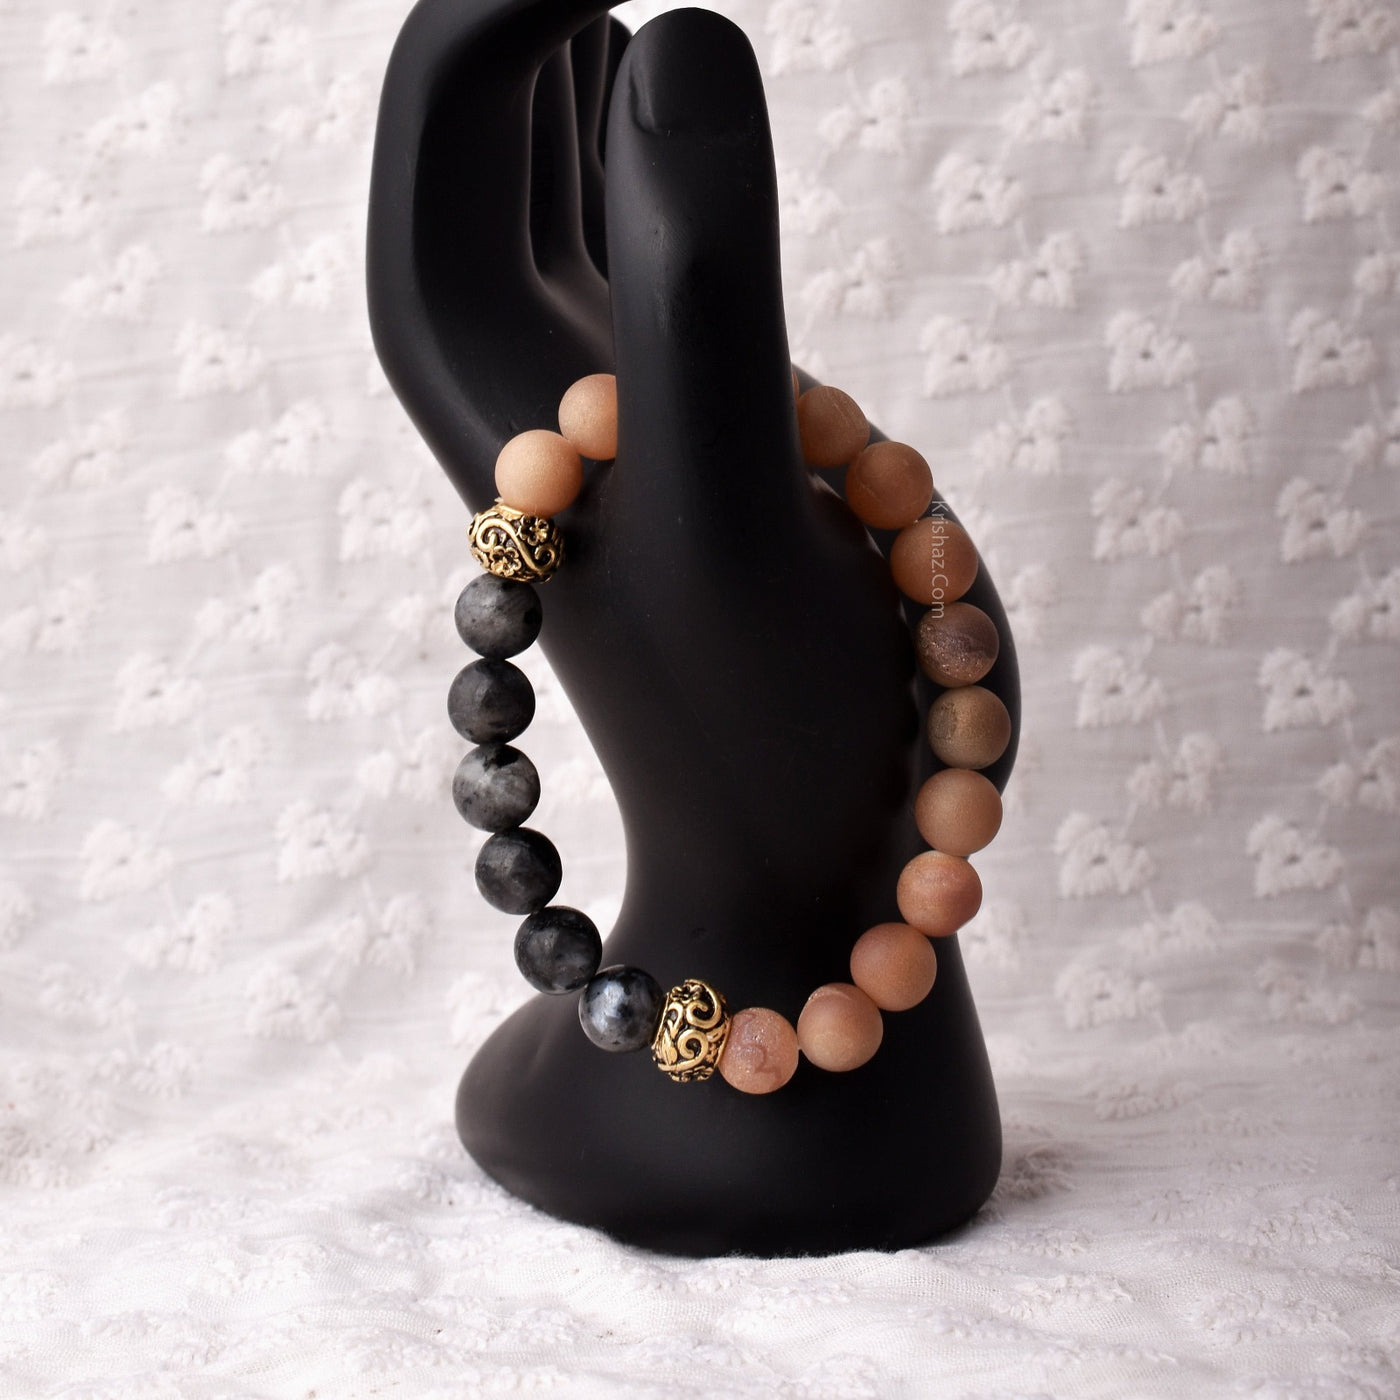 Round Beaded Stretch Bracelet, 8mm Natural Labradorite Larvikite Combine with Peach Druzy With Real Gold Plated Beads.